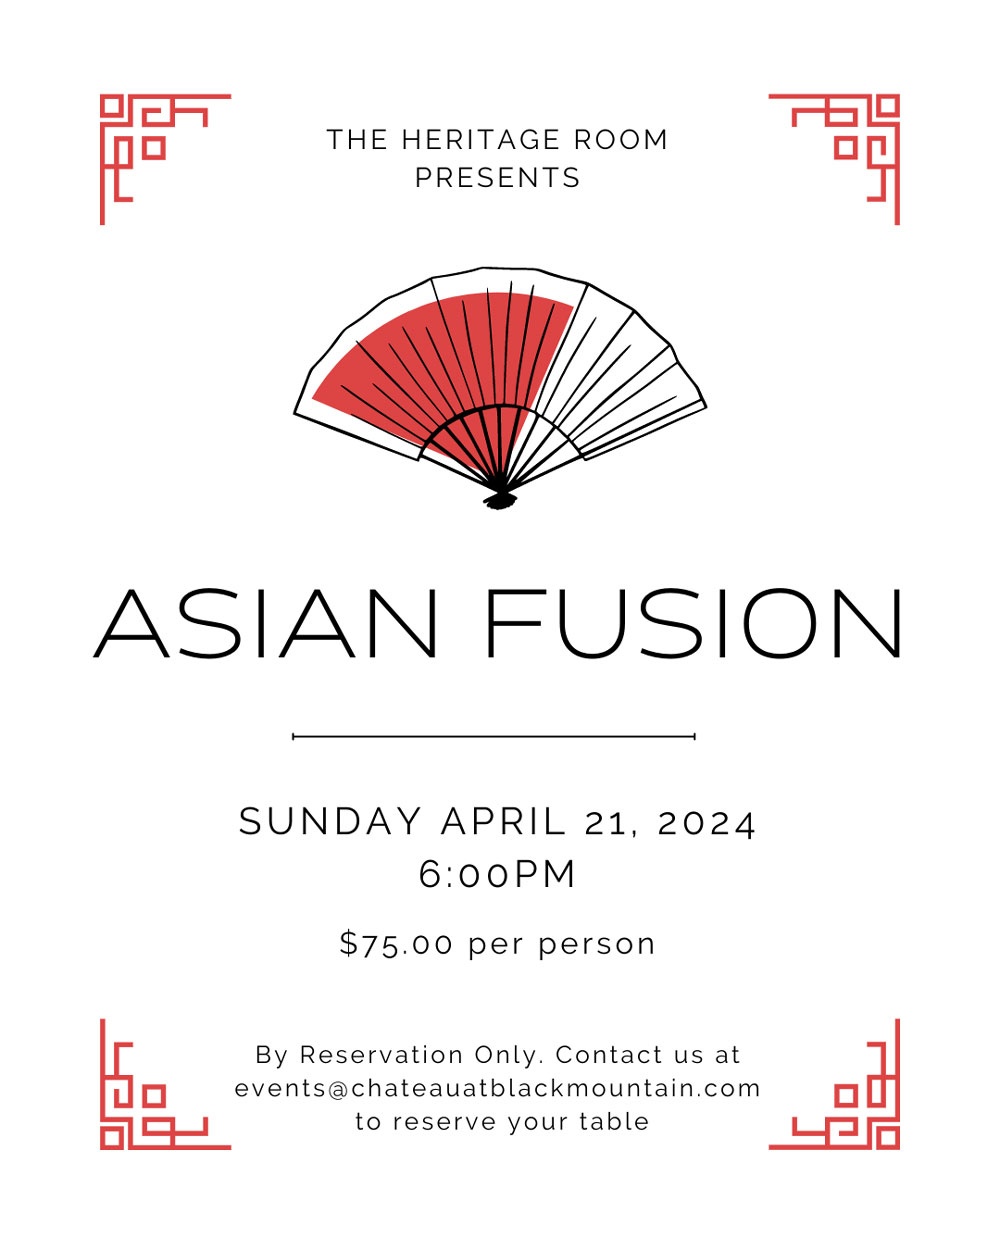 Asian Fusion at the Heritage Room at Chateau at Black Mountain, Sunday April 21, 2024